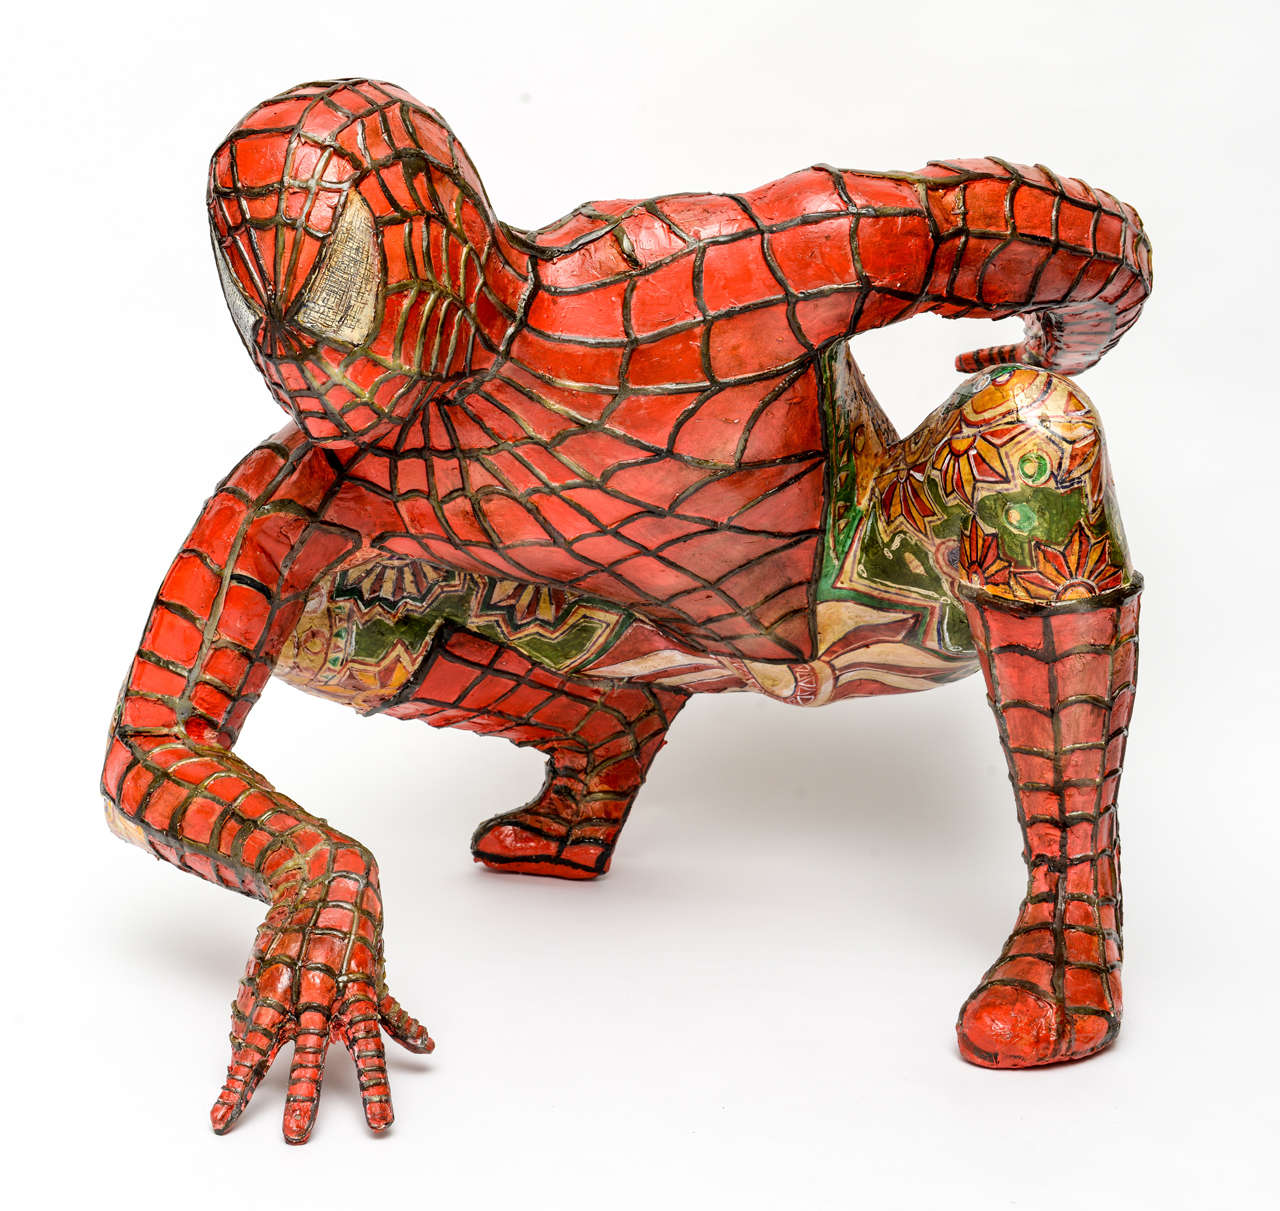 lifesize sculpture of Spiderman from the 